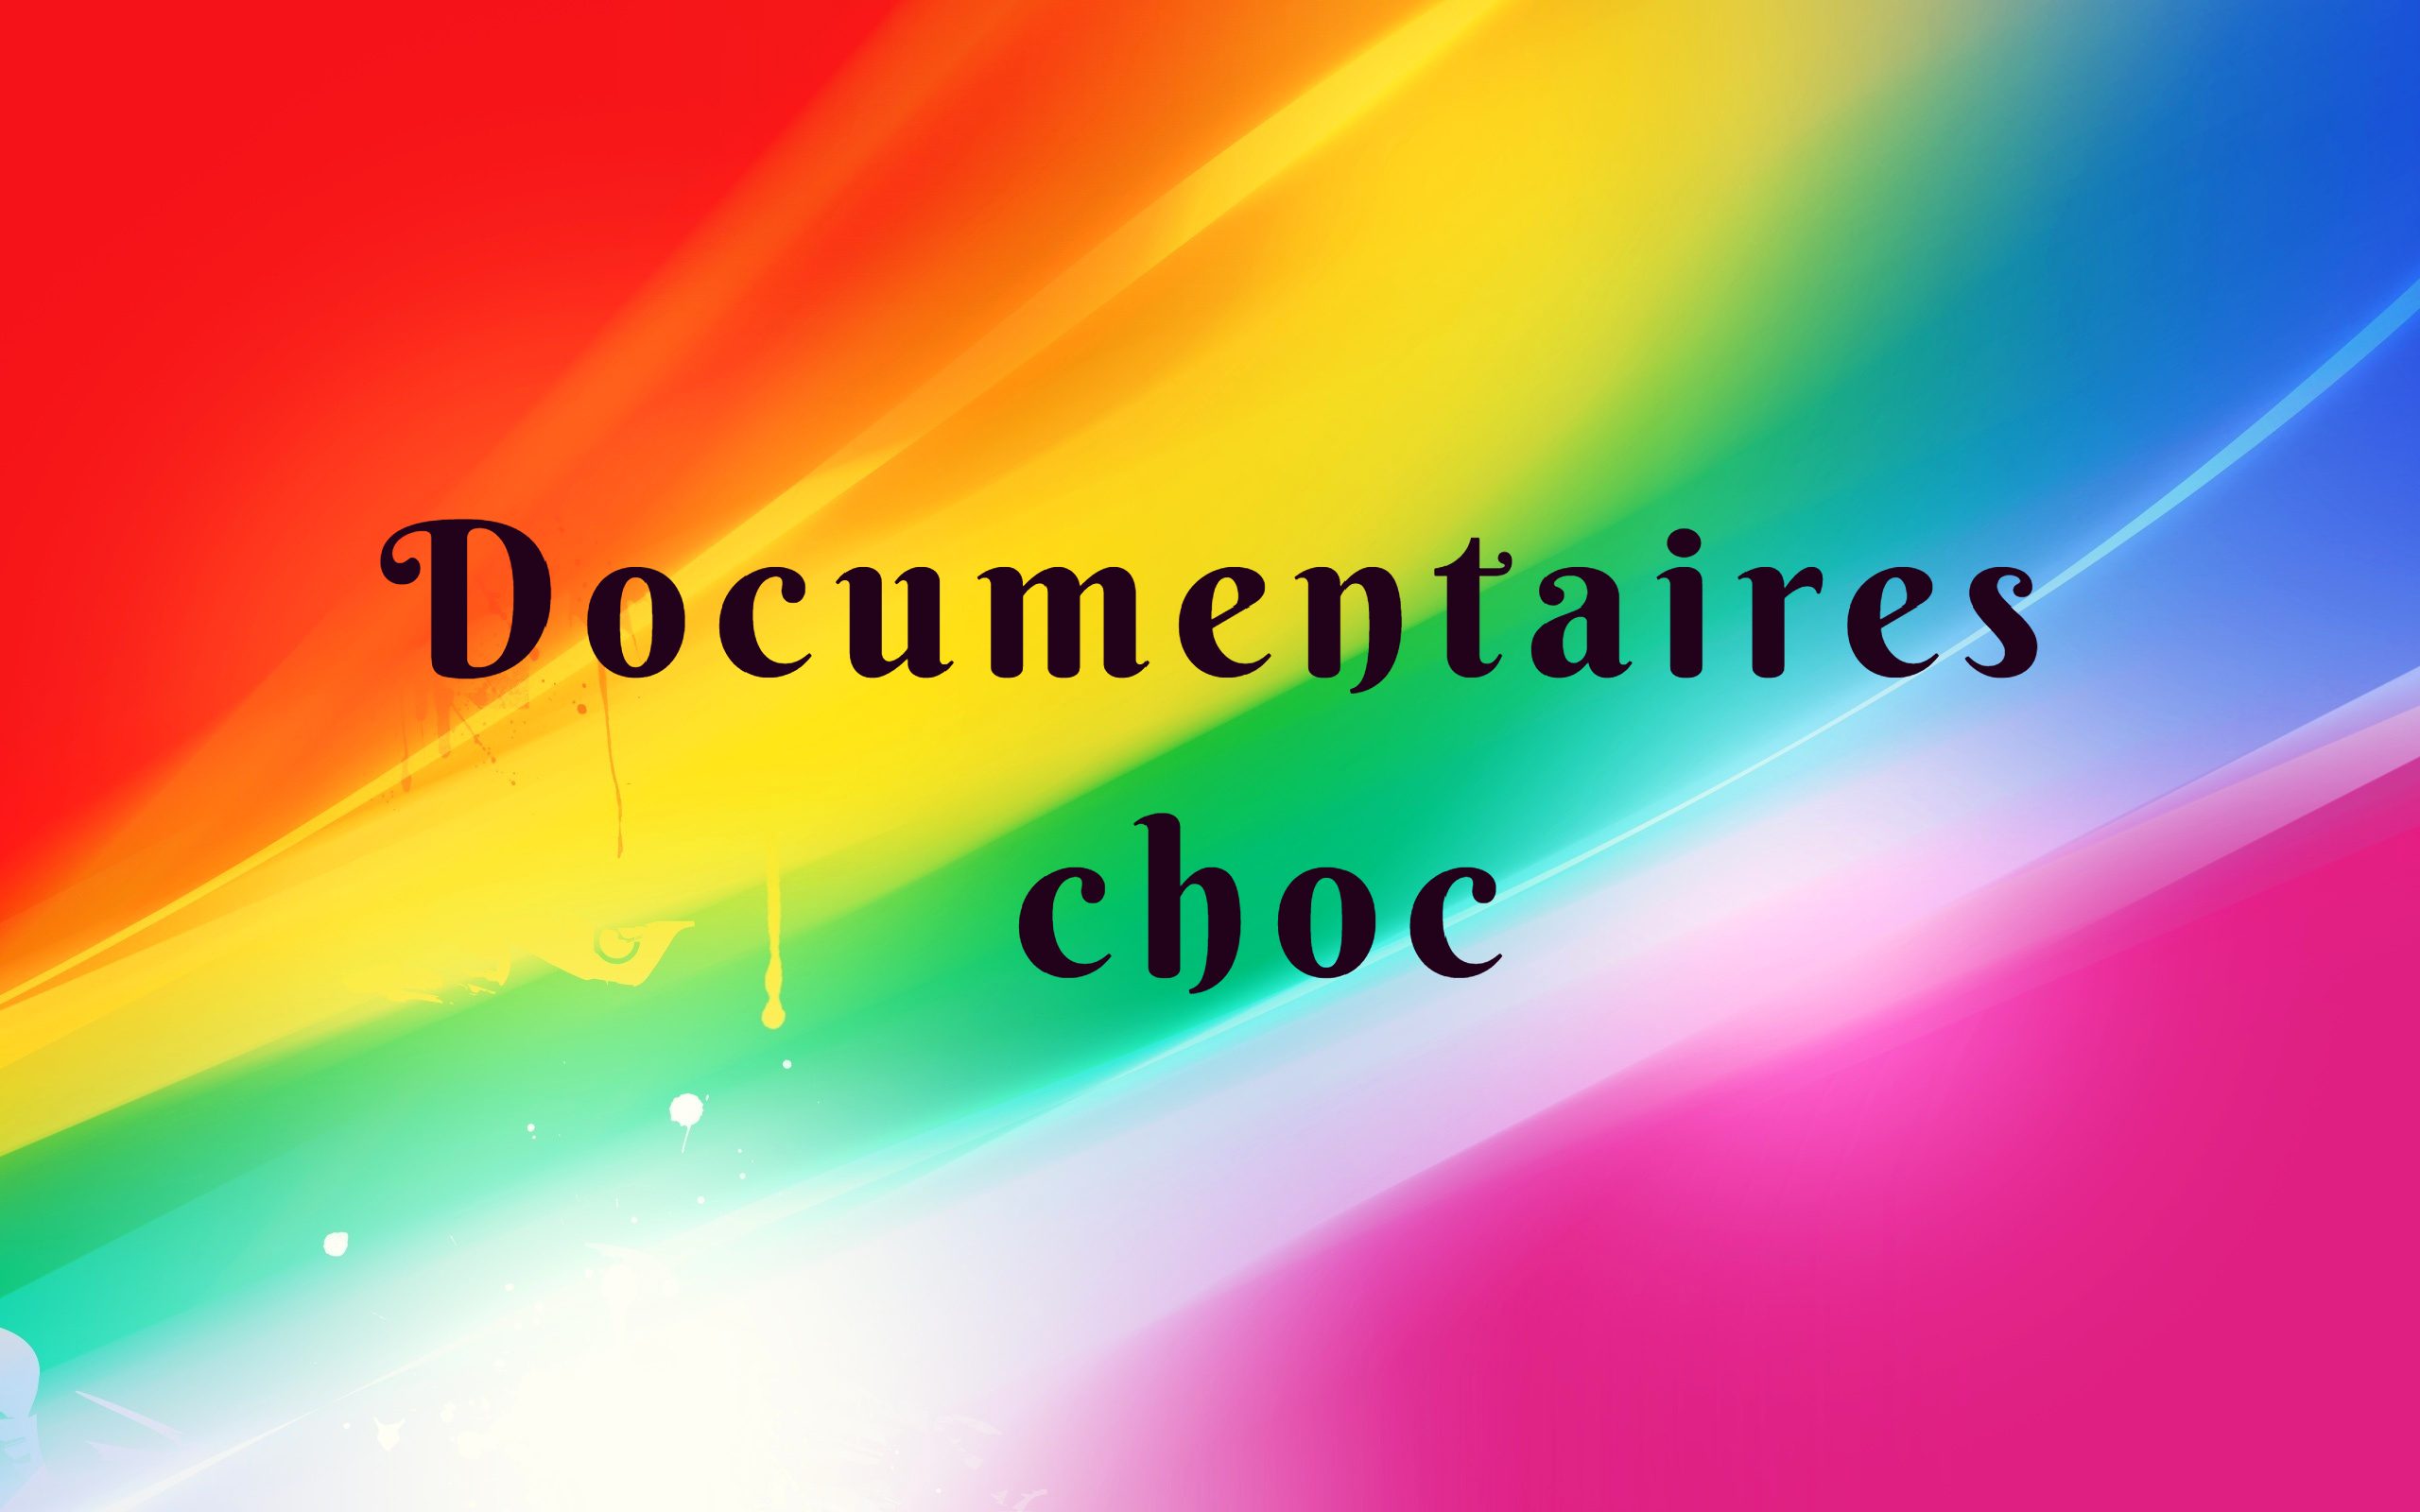 The Best Nation / Documentaires choc